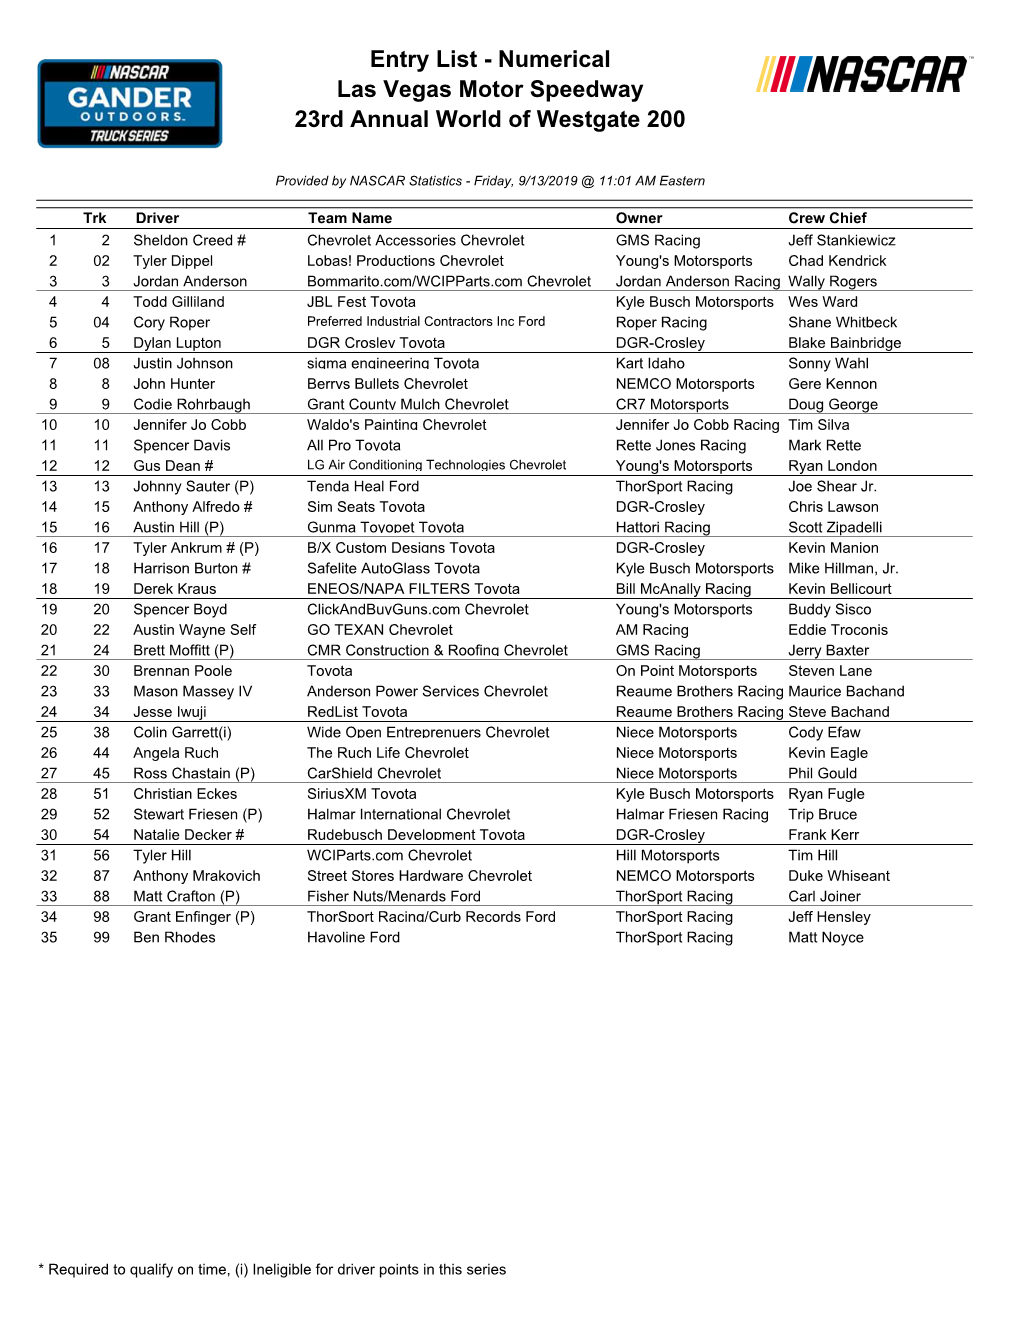 Entry List - Numerical Las Vegas Motor Speedway 23Rd Annual World of Westgate 200